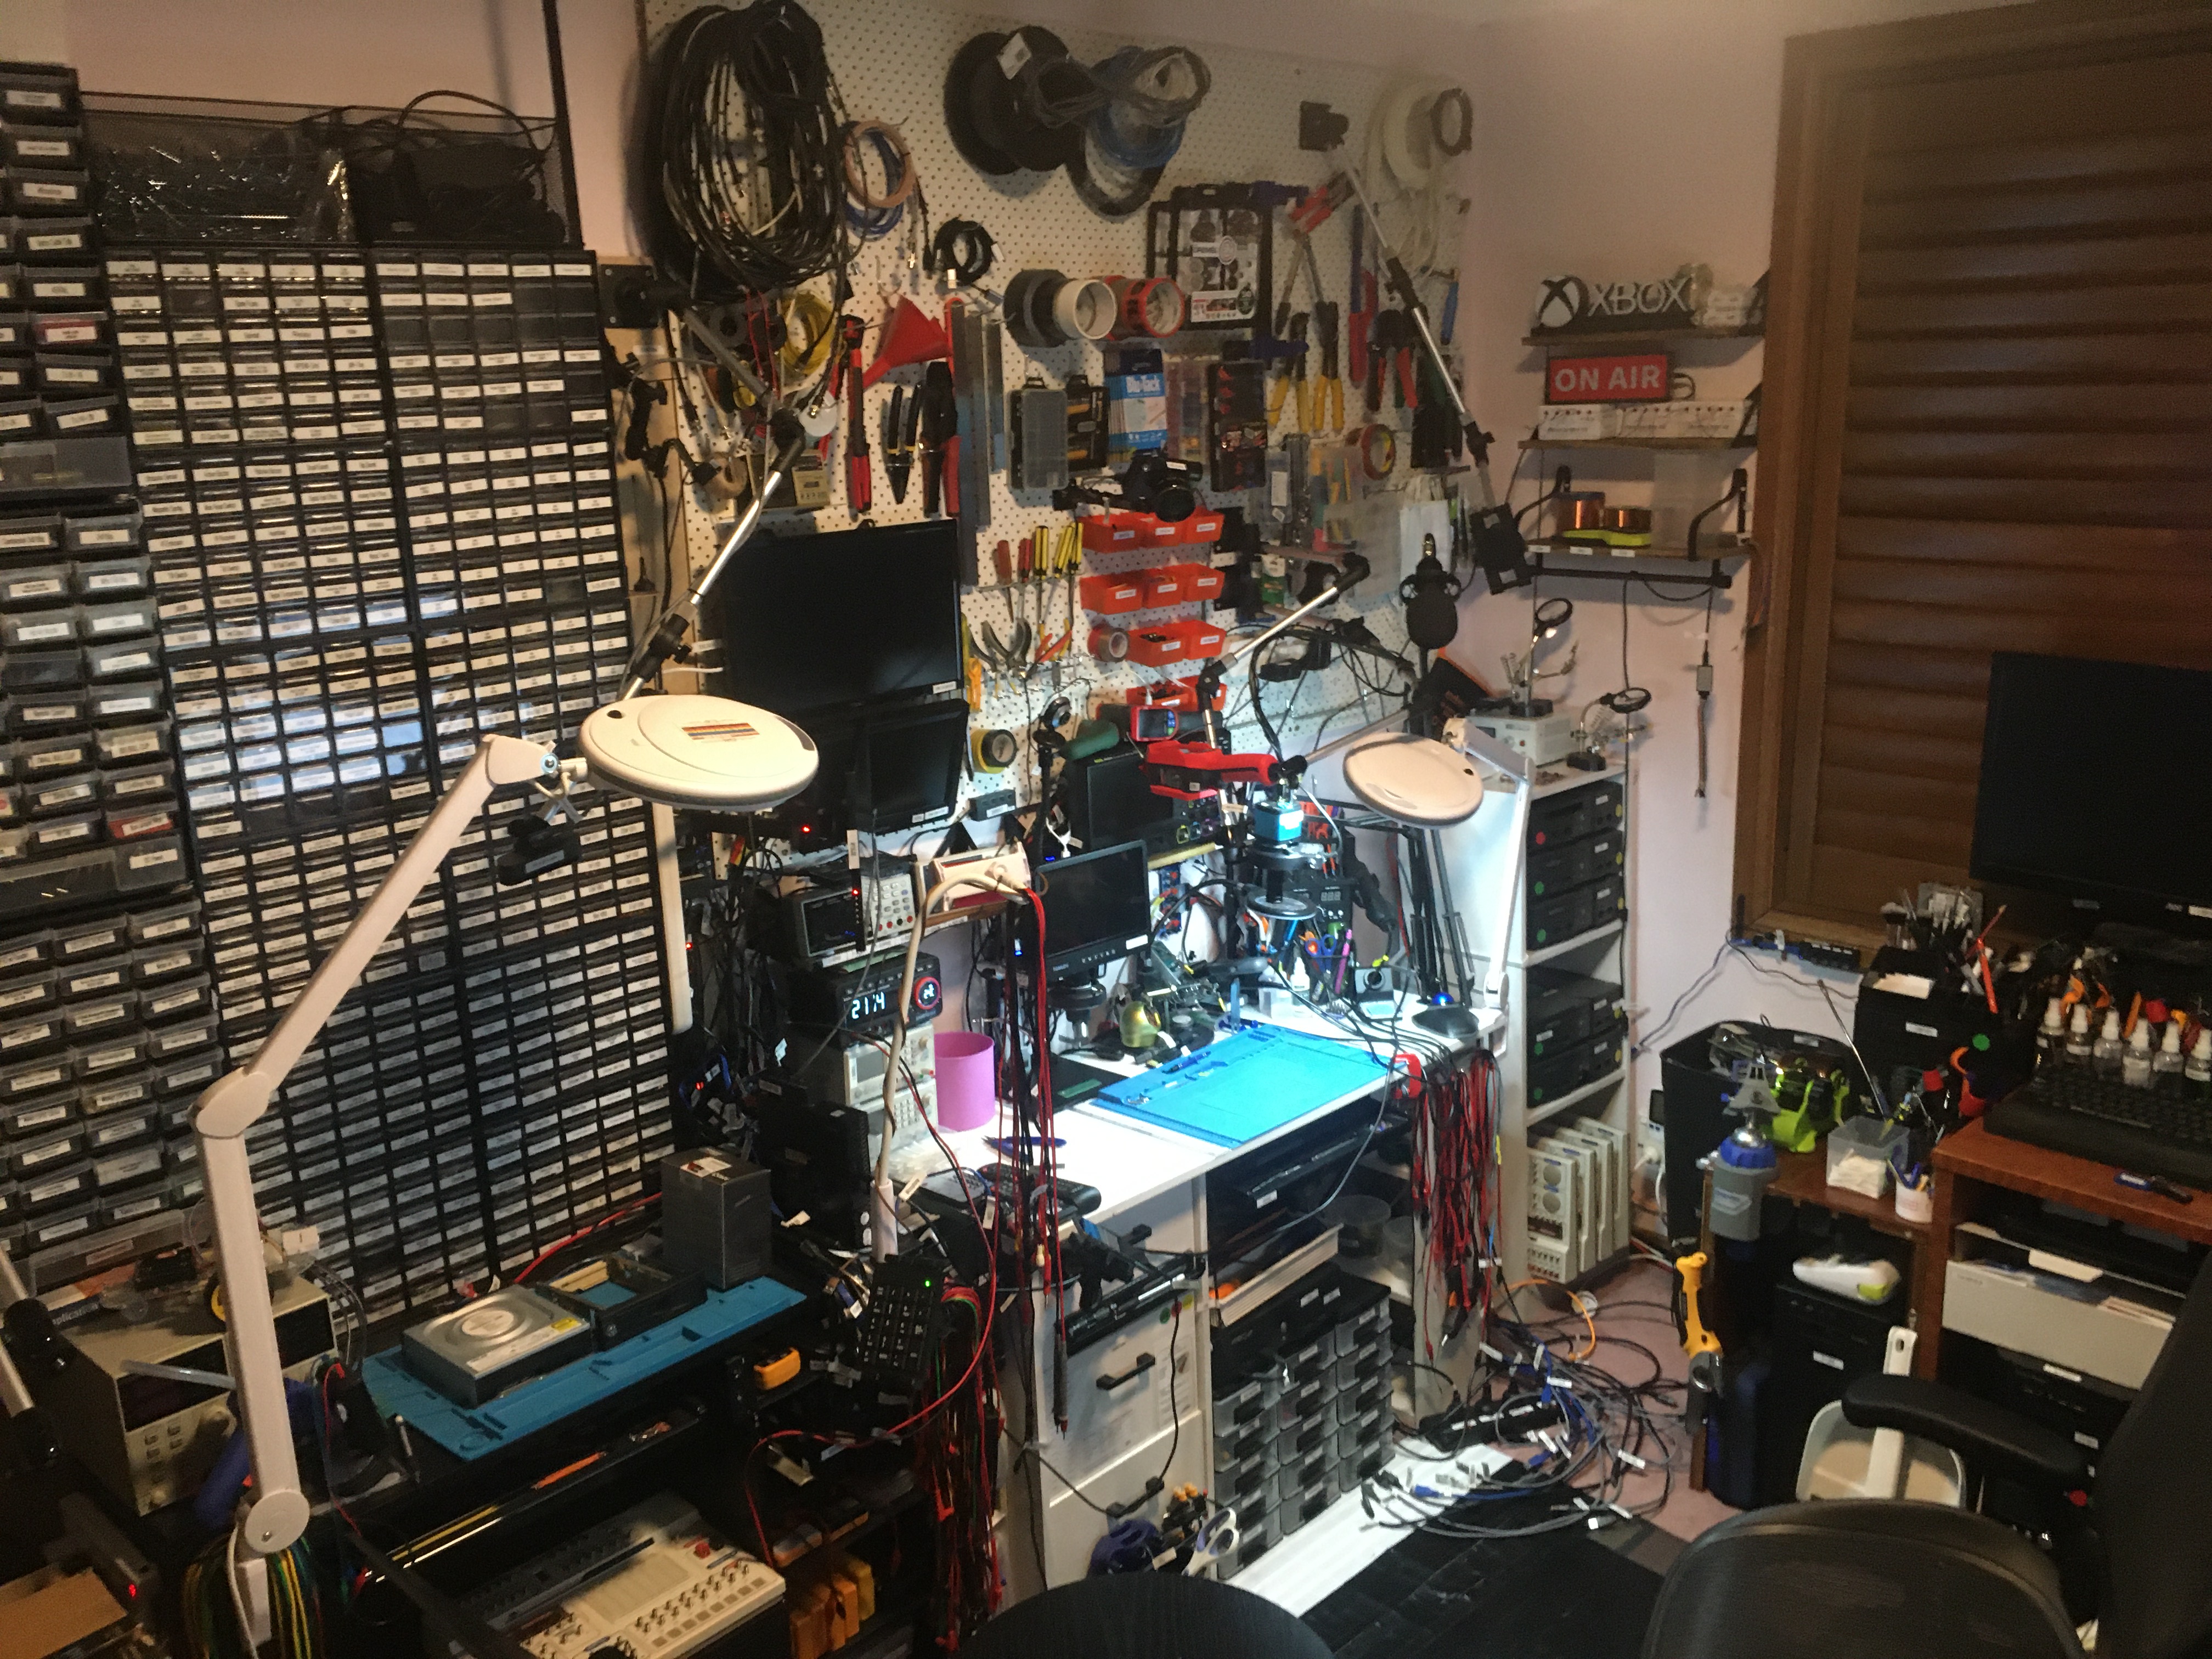 The state of John's lab, a work in progress